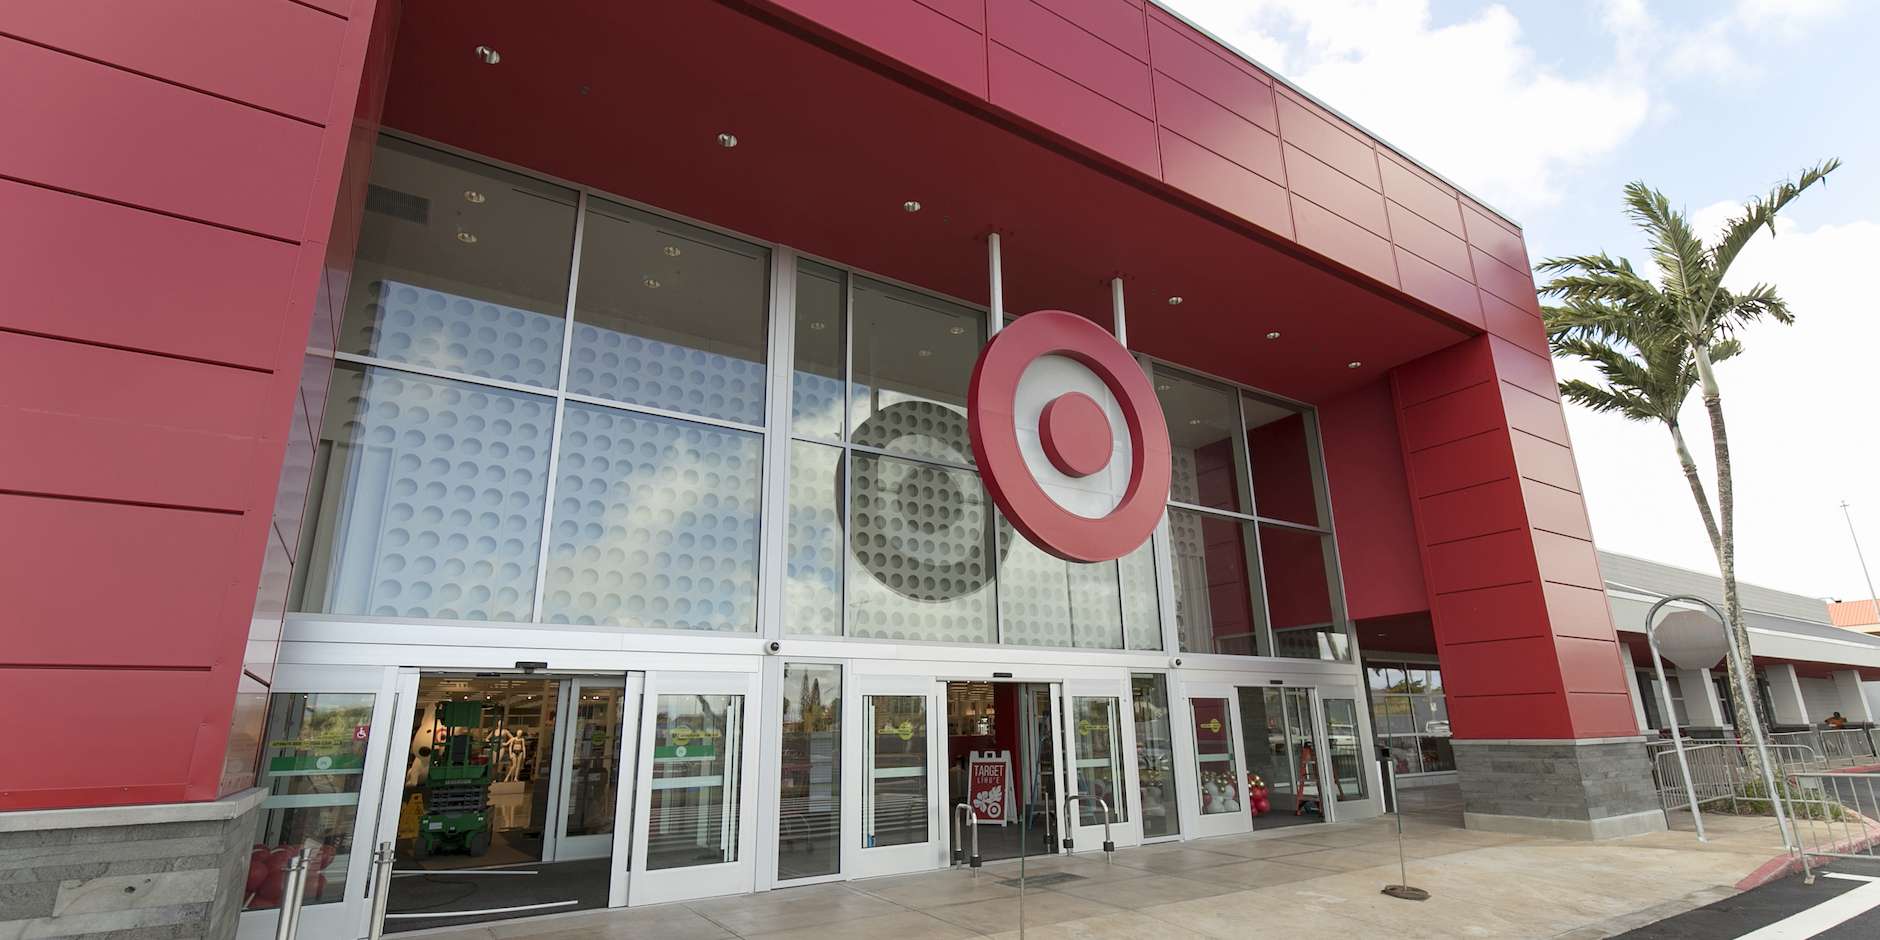 Target Announces Two-Day Cyber Monday Sale